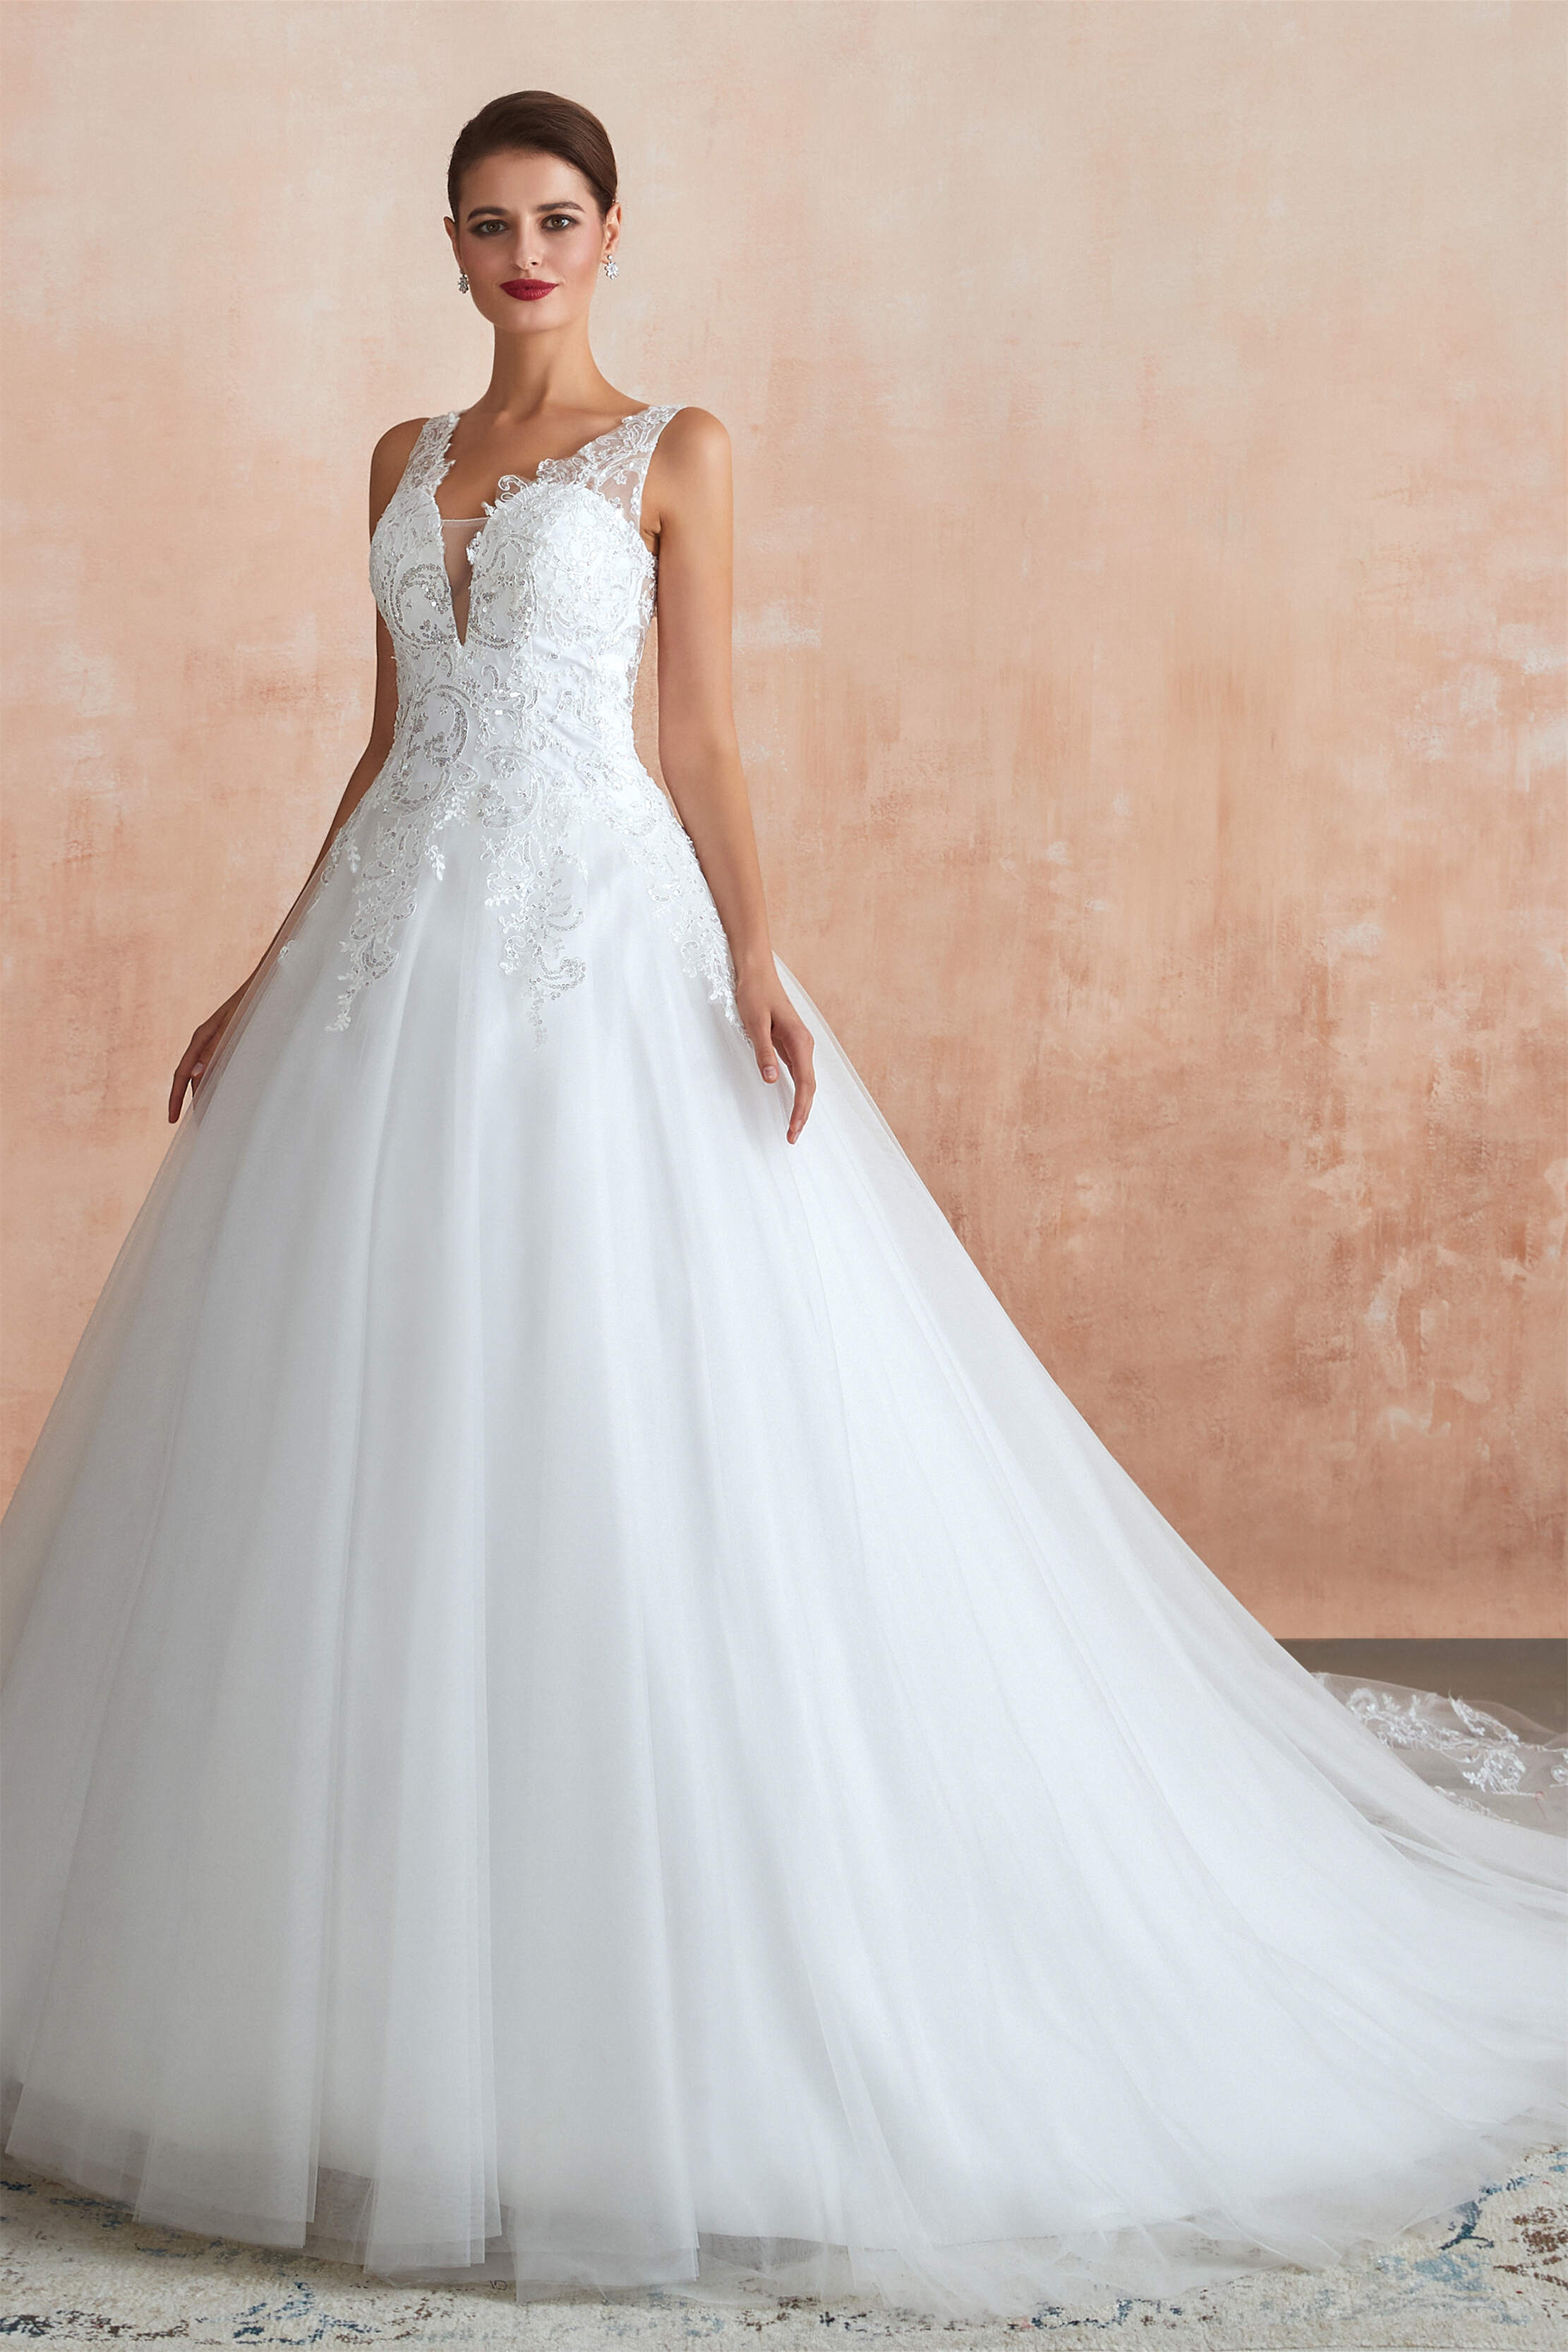 Weddings Dress Online, A-line with Sequined Appliques Tulle Illusion Back Wedding Dresses